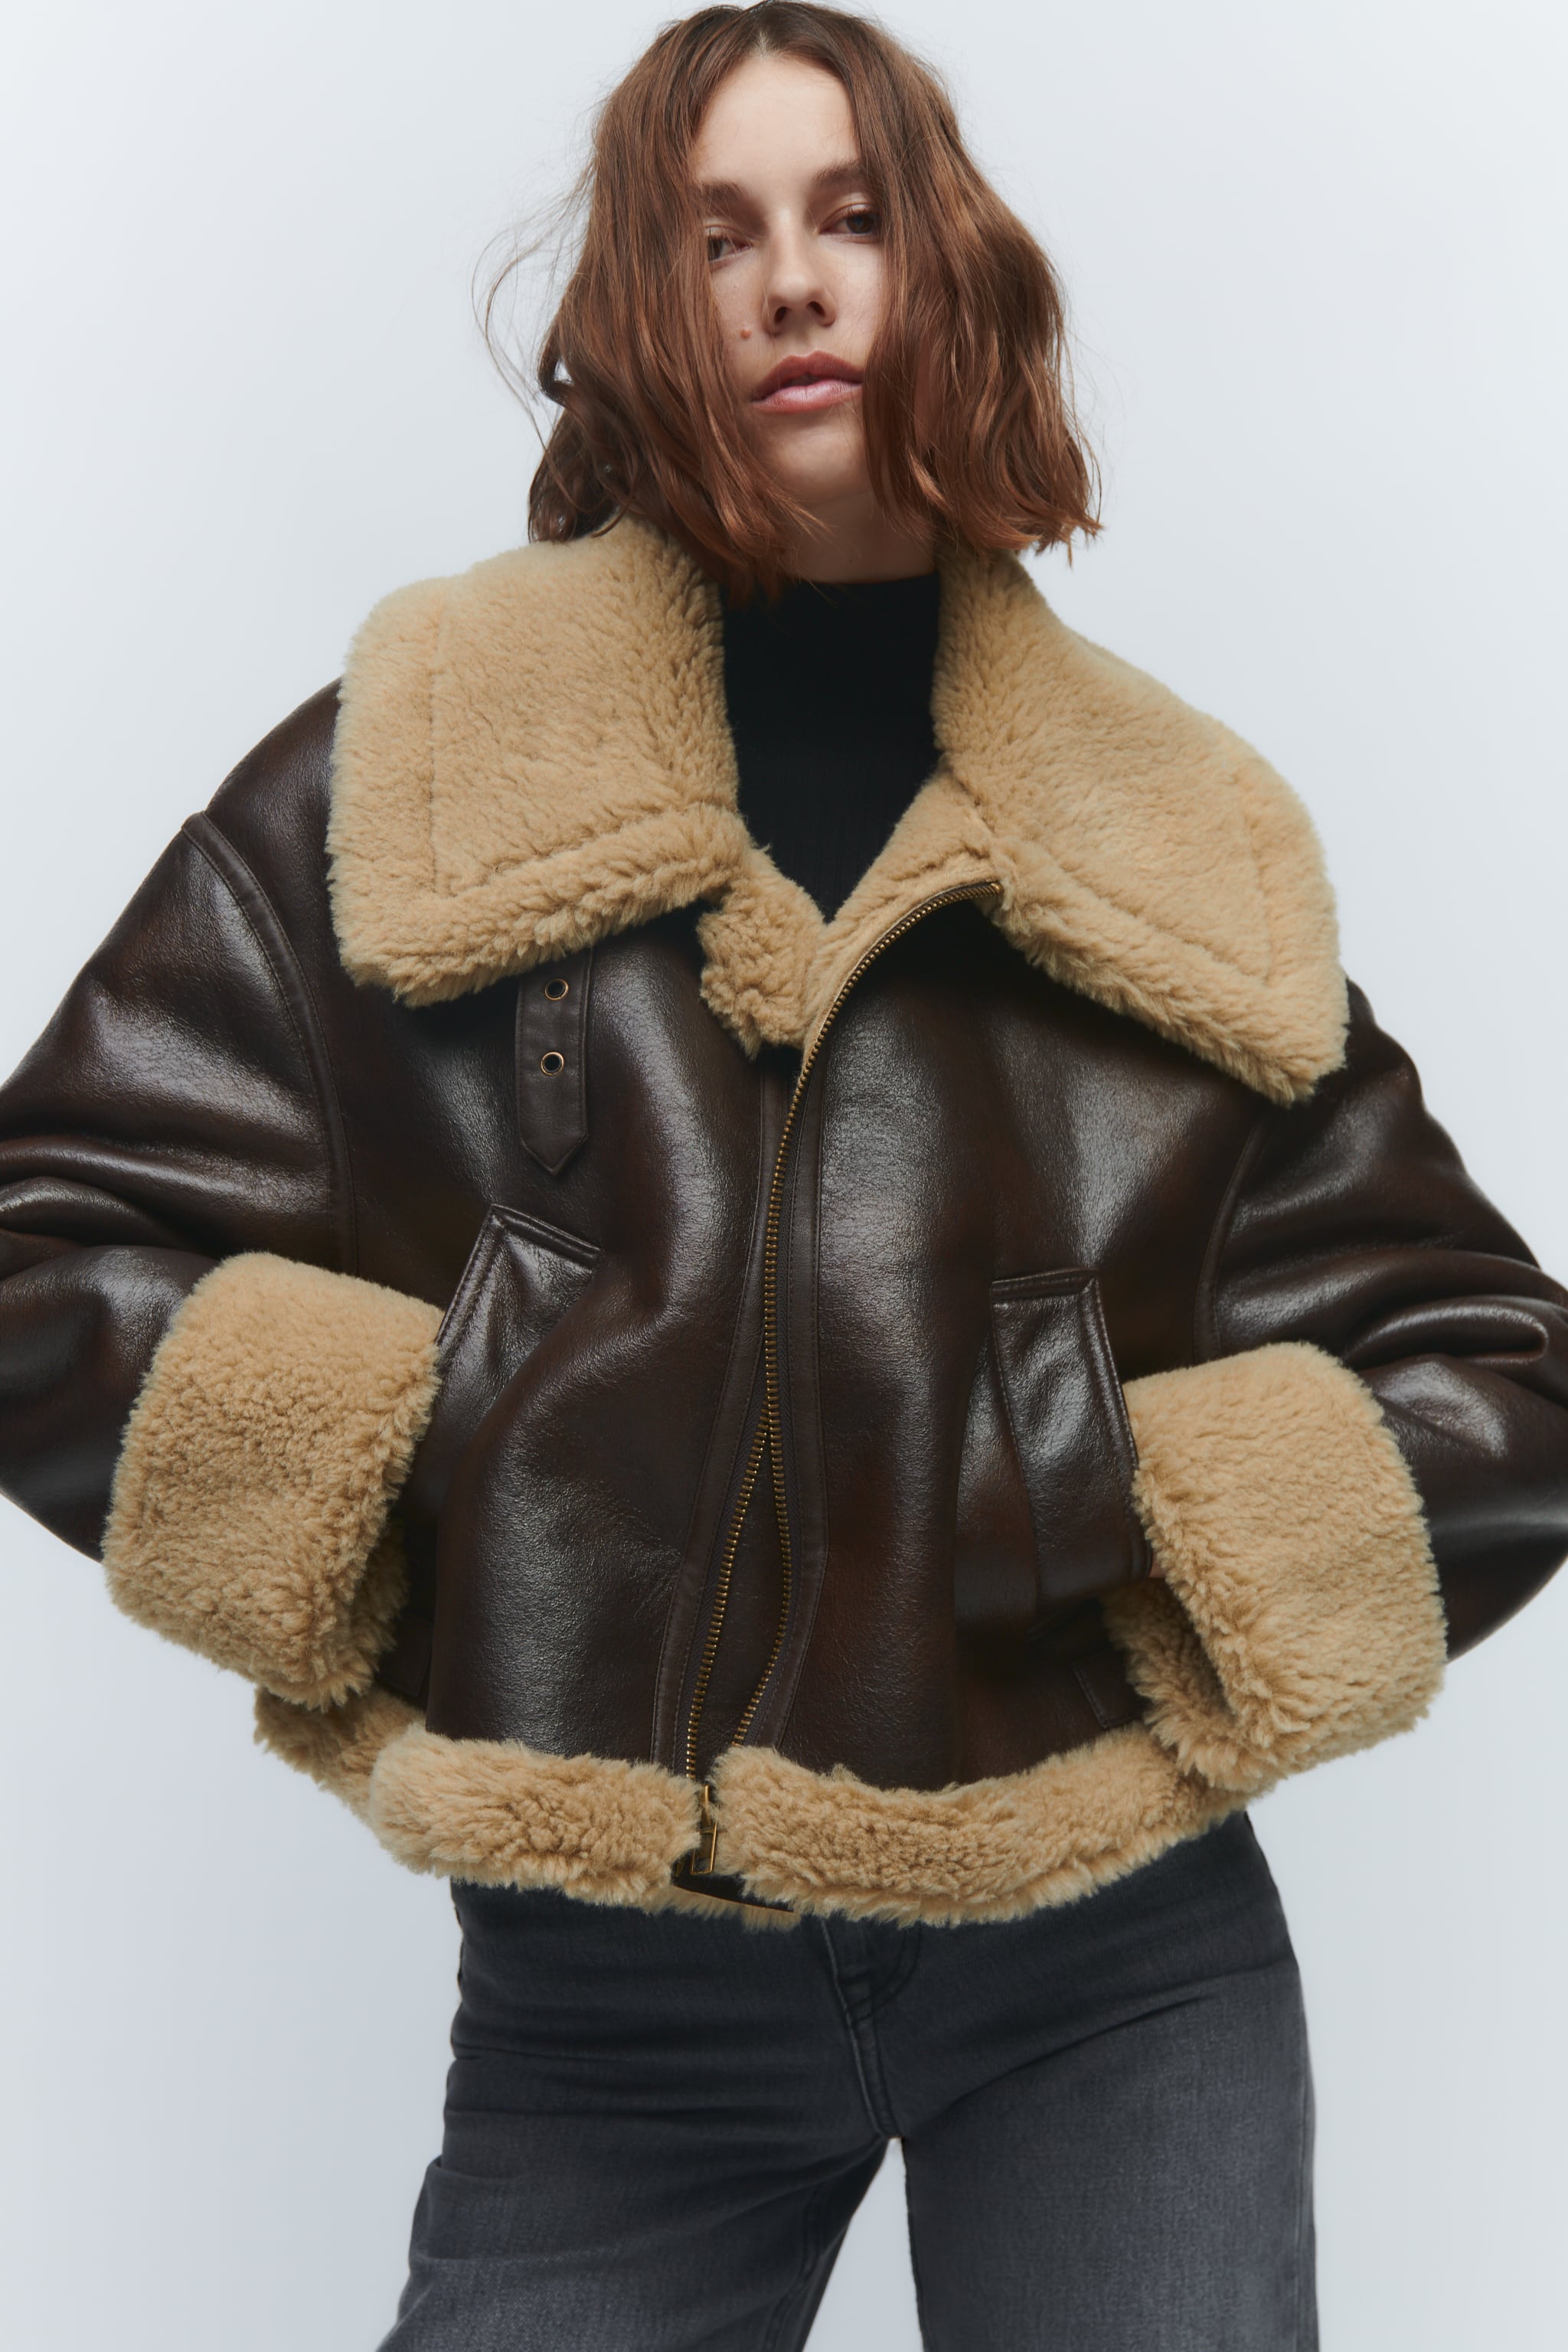 The Viral Zara Shearling Coat Is Now Back in Stock | Who What Wear UK